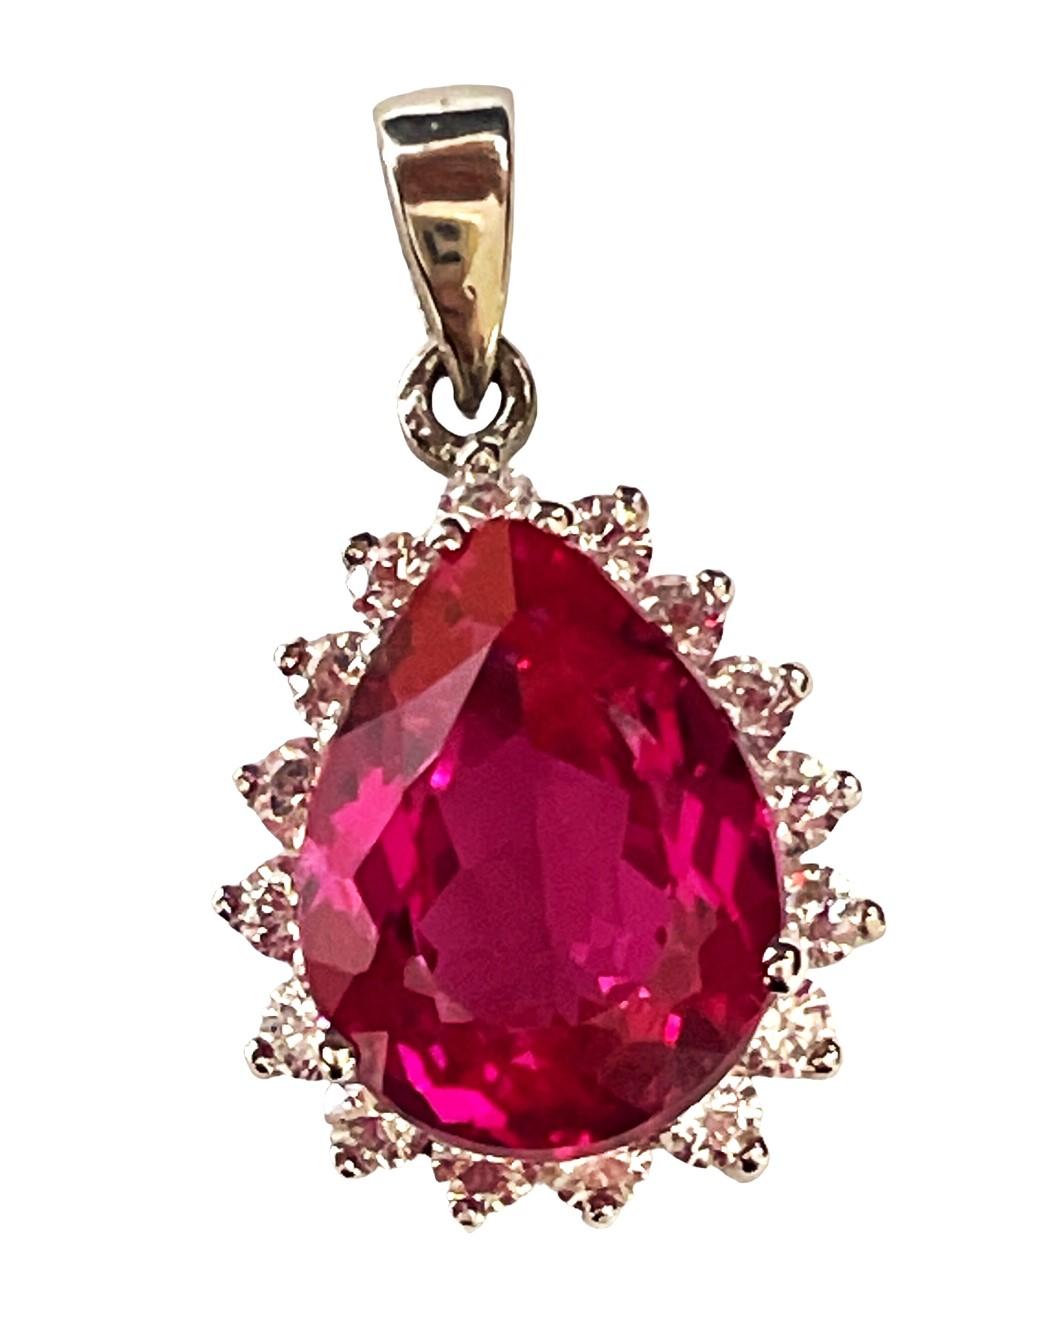 New African 8.7 Carat Raspberry Topaz and White Sapphire Sterling Pendant For Sale 2